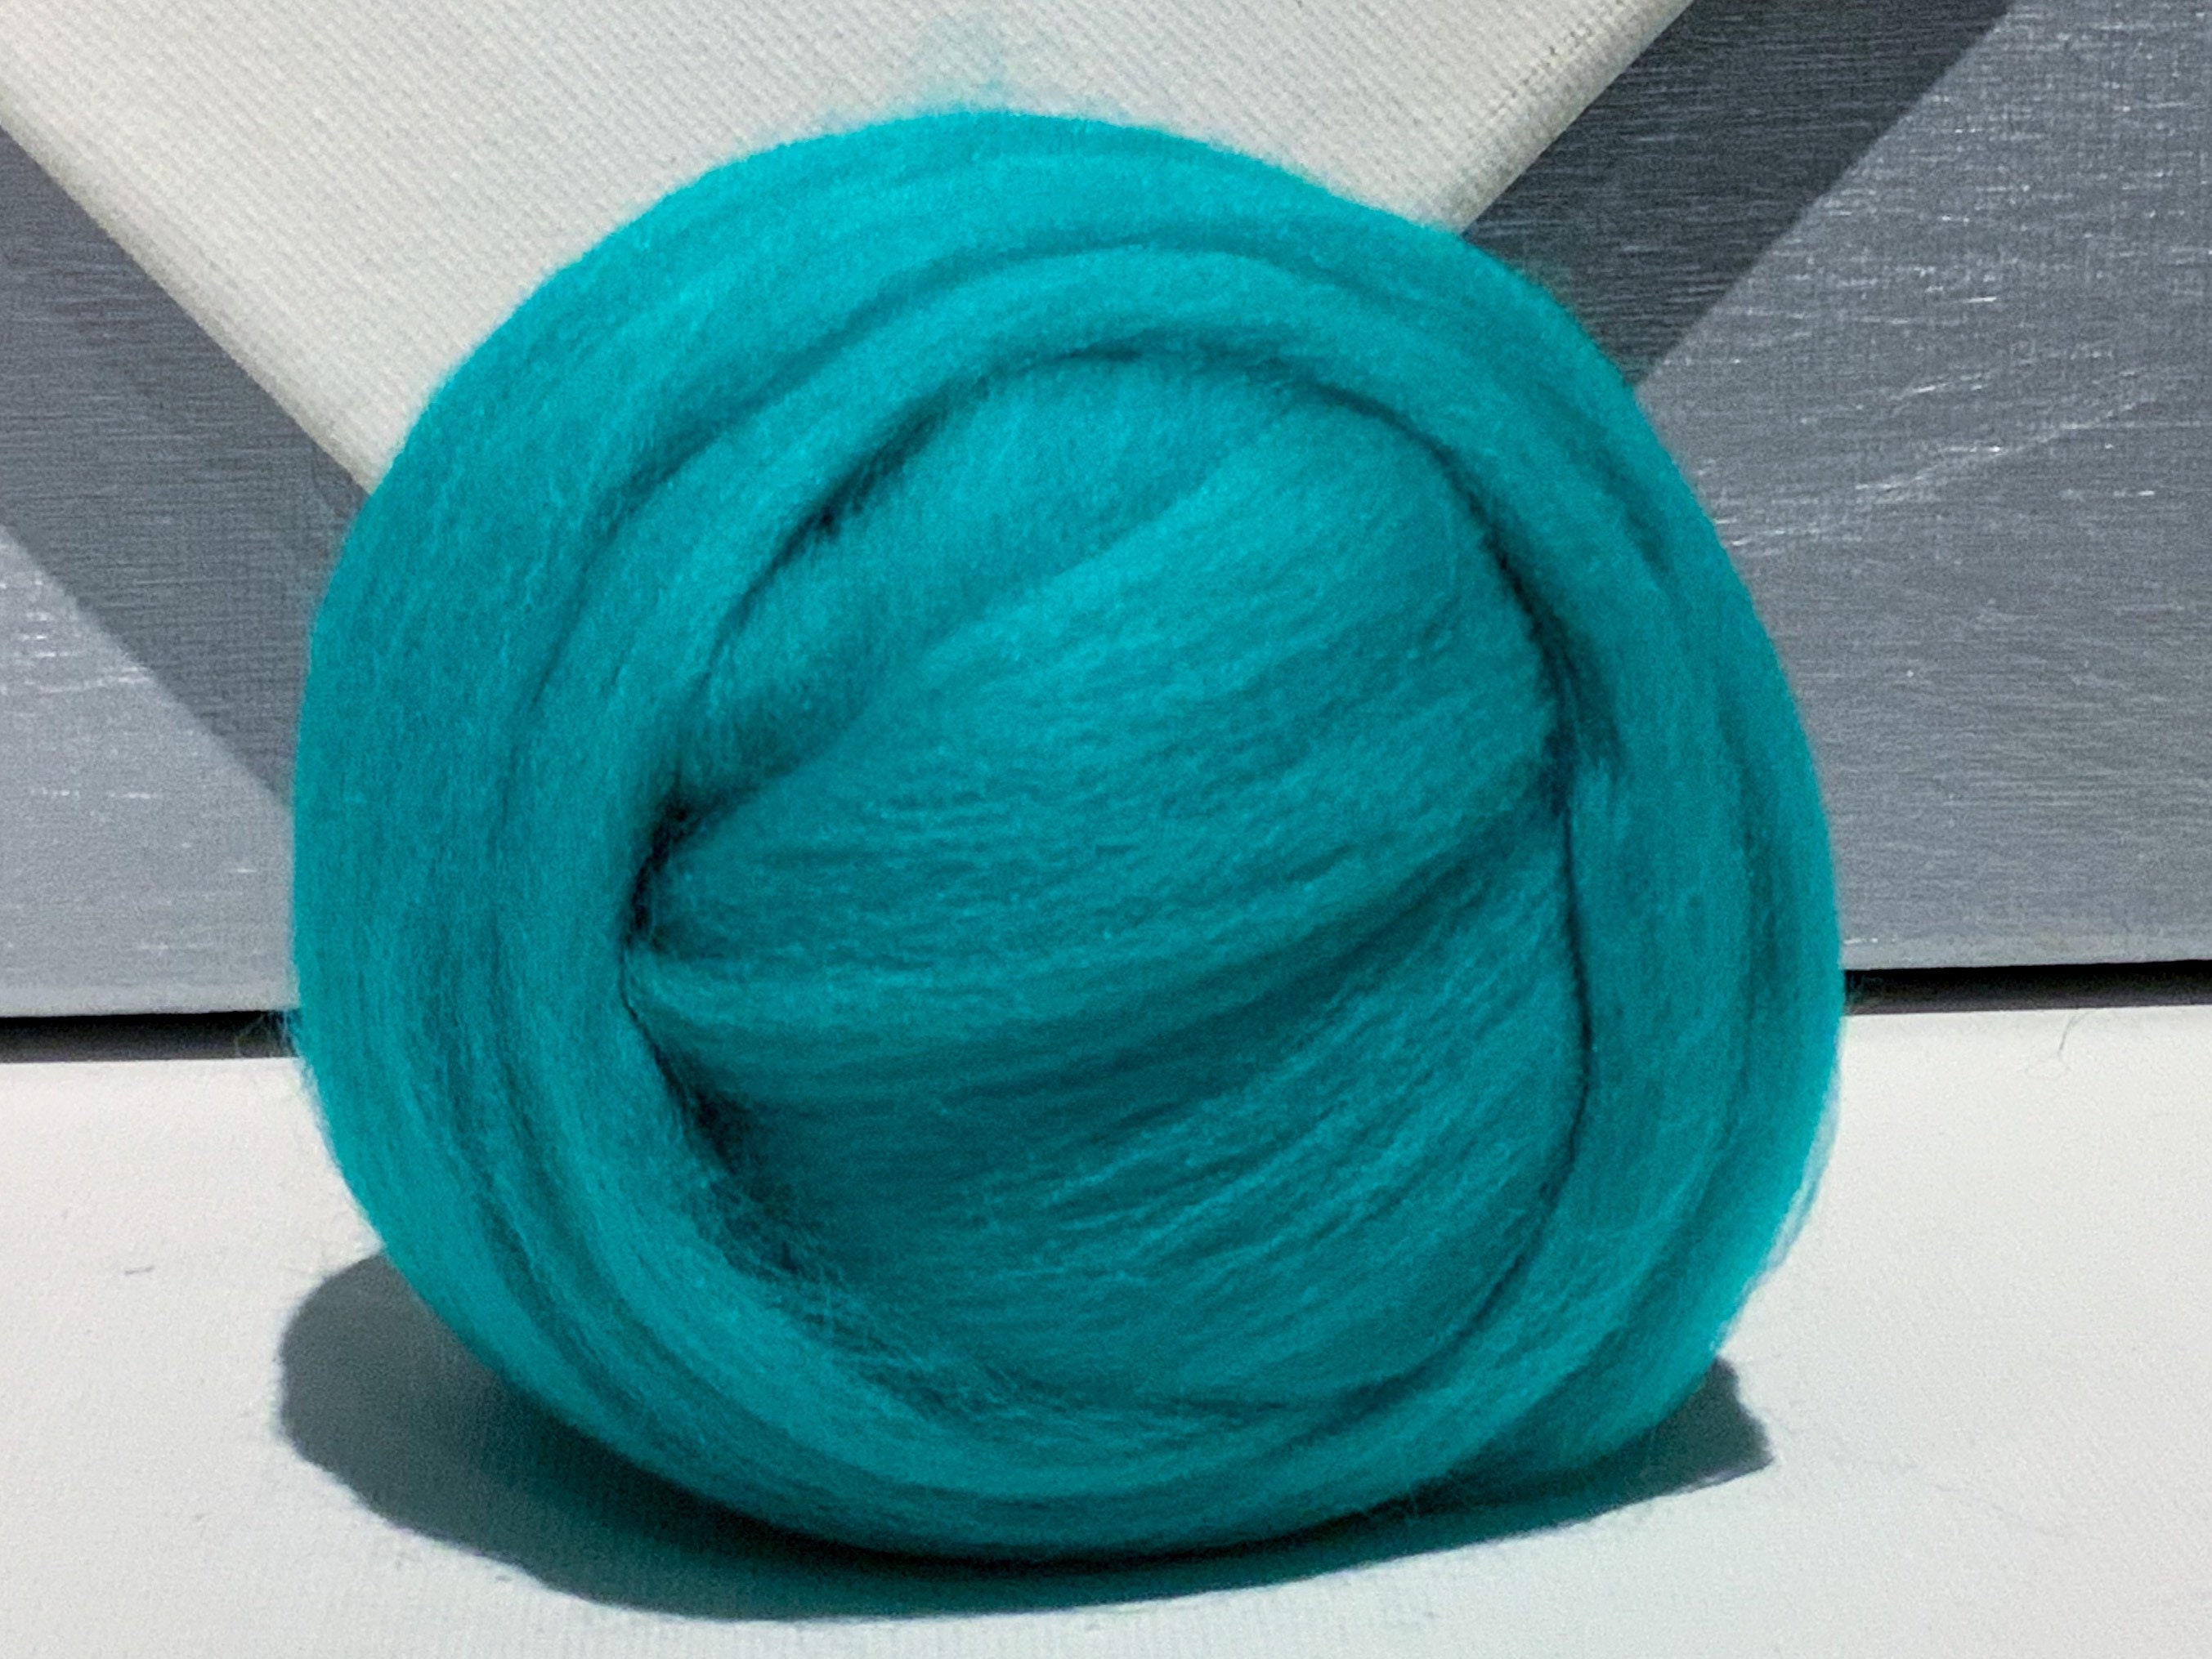 Turquoise Green Merino Wool Roving - 1 oz of Quality Fiber for